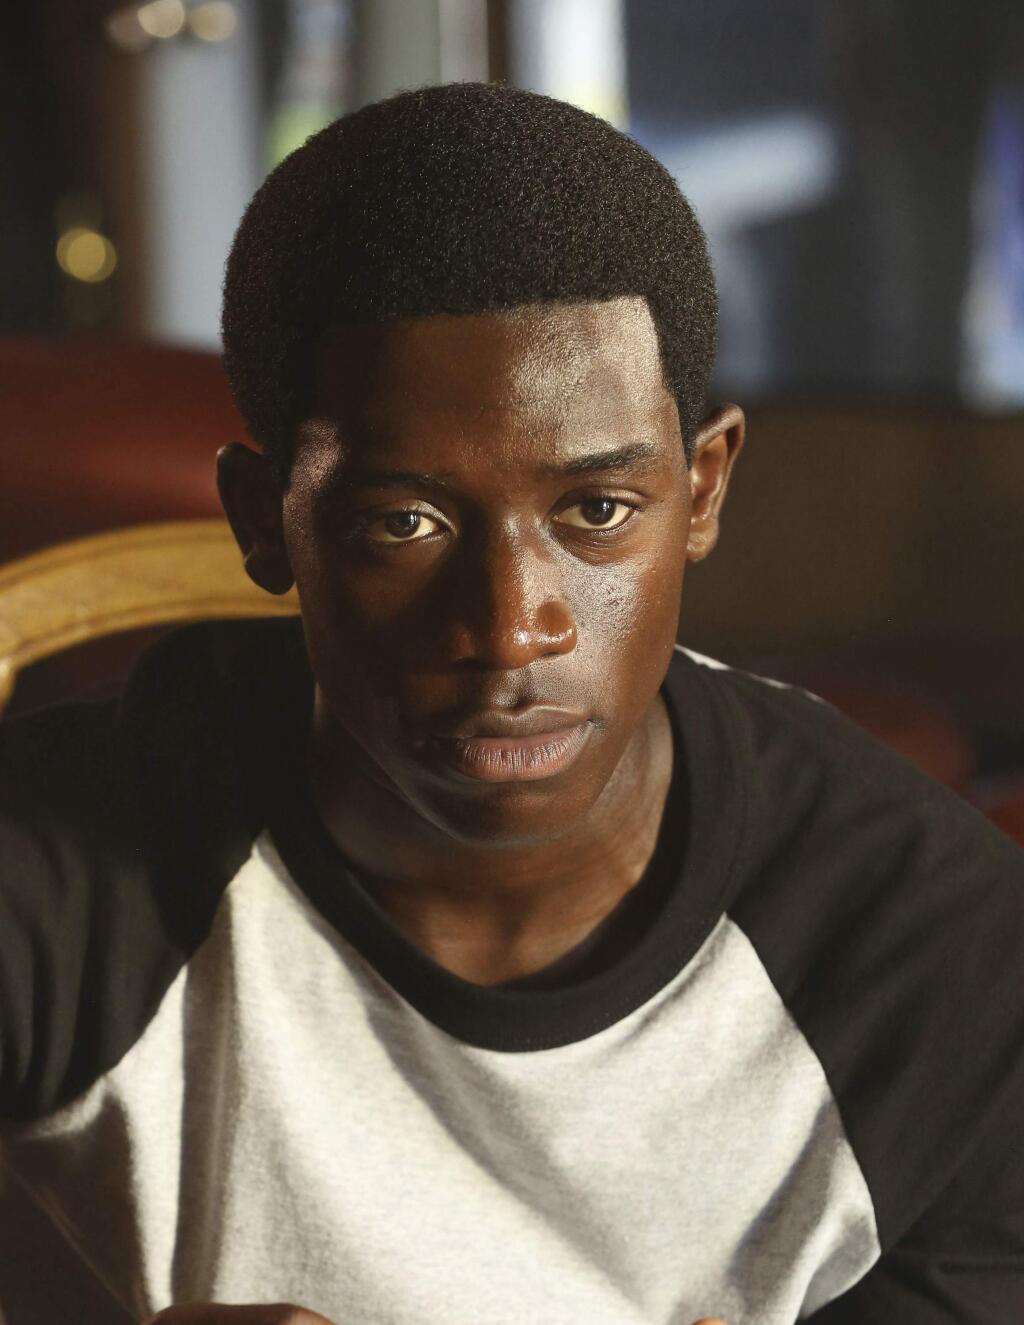 This image provided by FX shows Damson Idris who stars as Franklin Saint on the FX's new series “Snowfall.” which focuses on the genesis of how crack cocaine became a rampant epidemic in Los Angeles' inner city neighborhoods in 1983. The first season premieres Wednesday, July 5, 2017. (Michael Yarish/FX via AP)